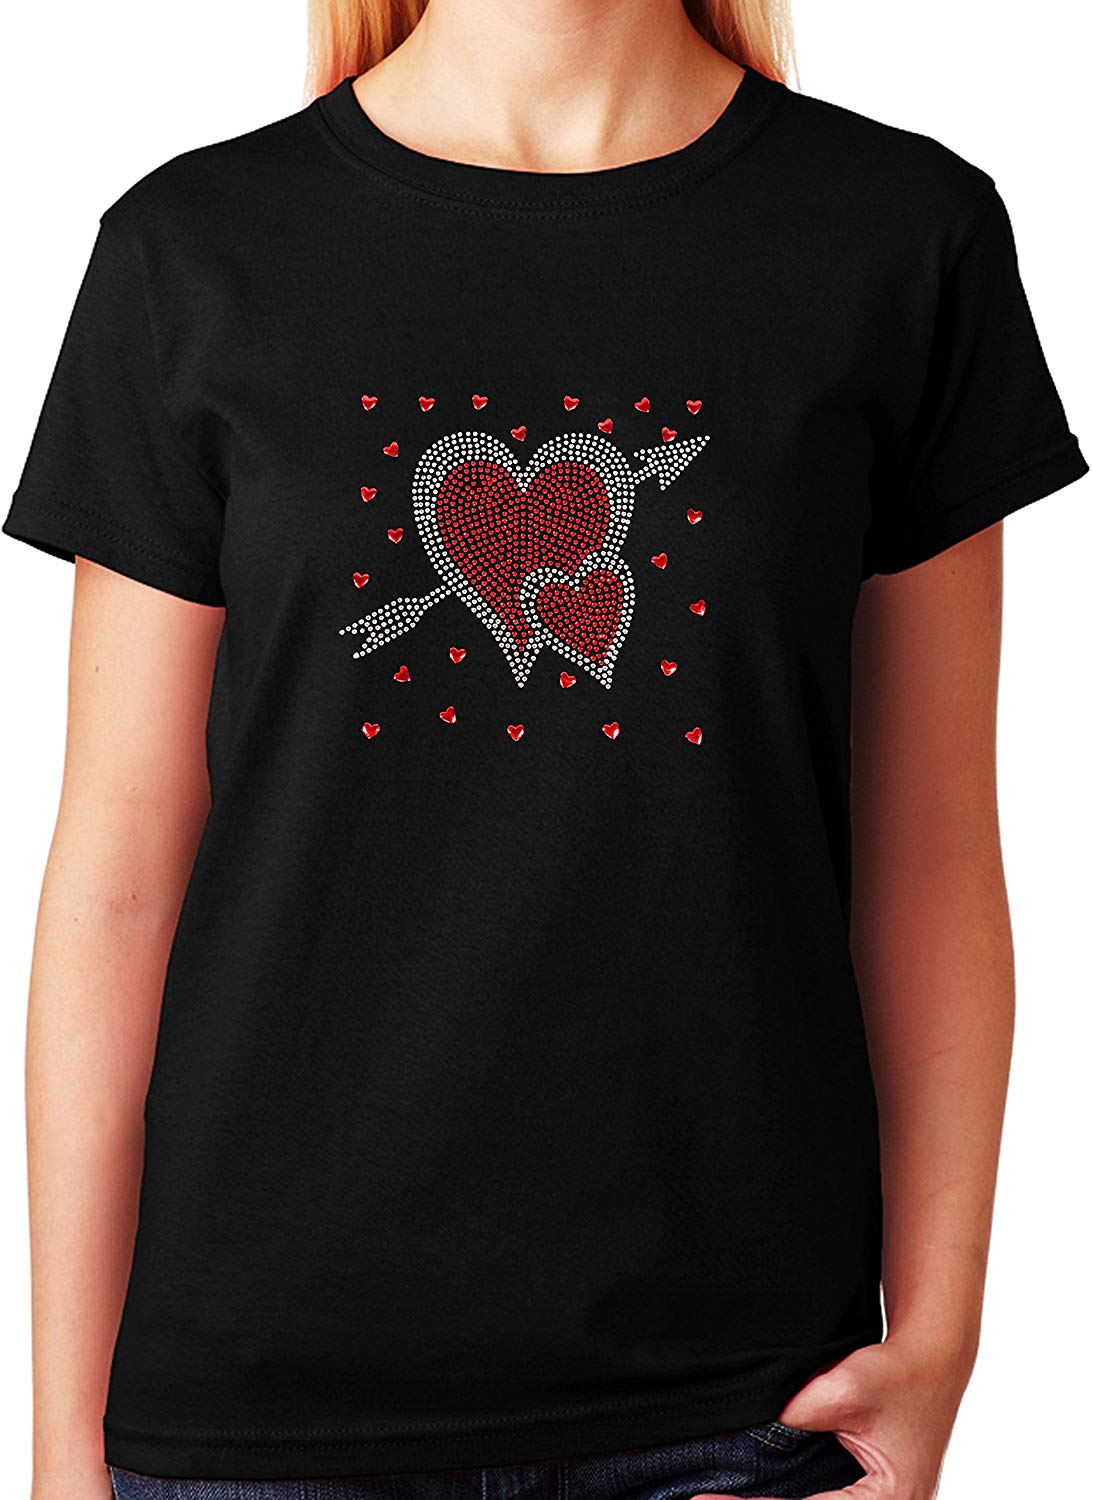 Women's / Unisex T-Shirt with Hearts With Arrow in Rhinestones